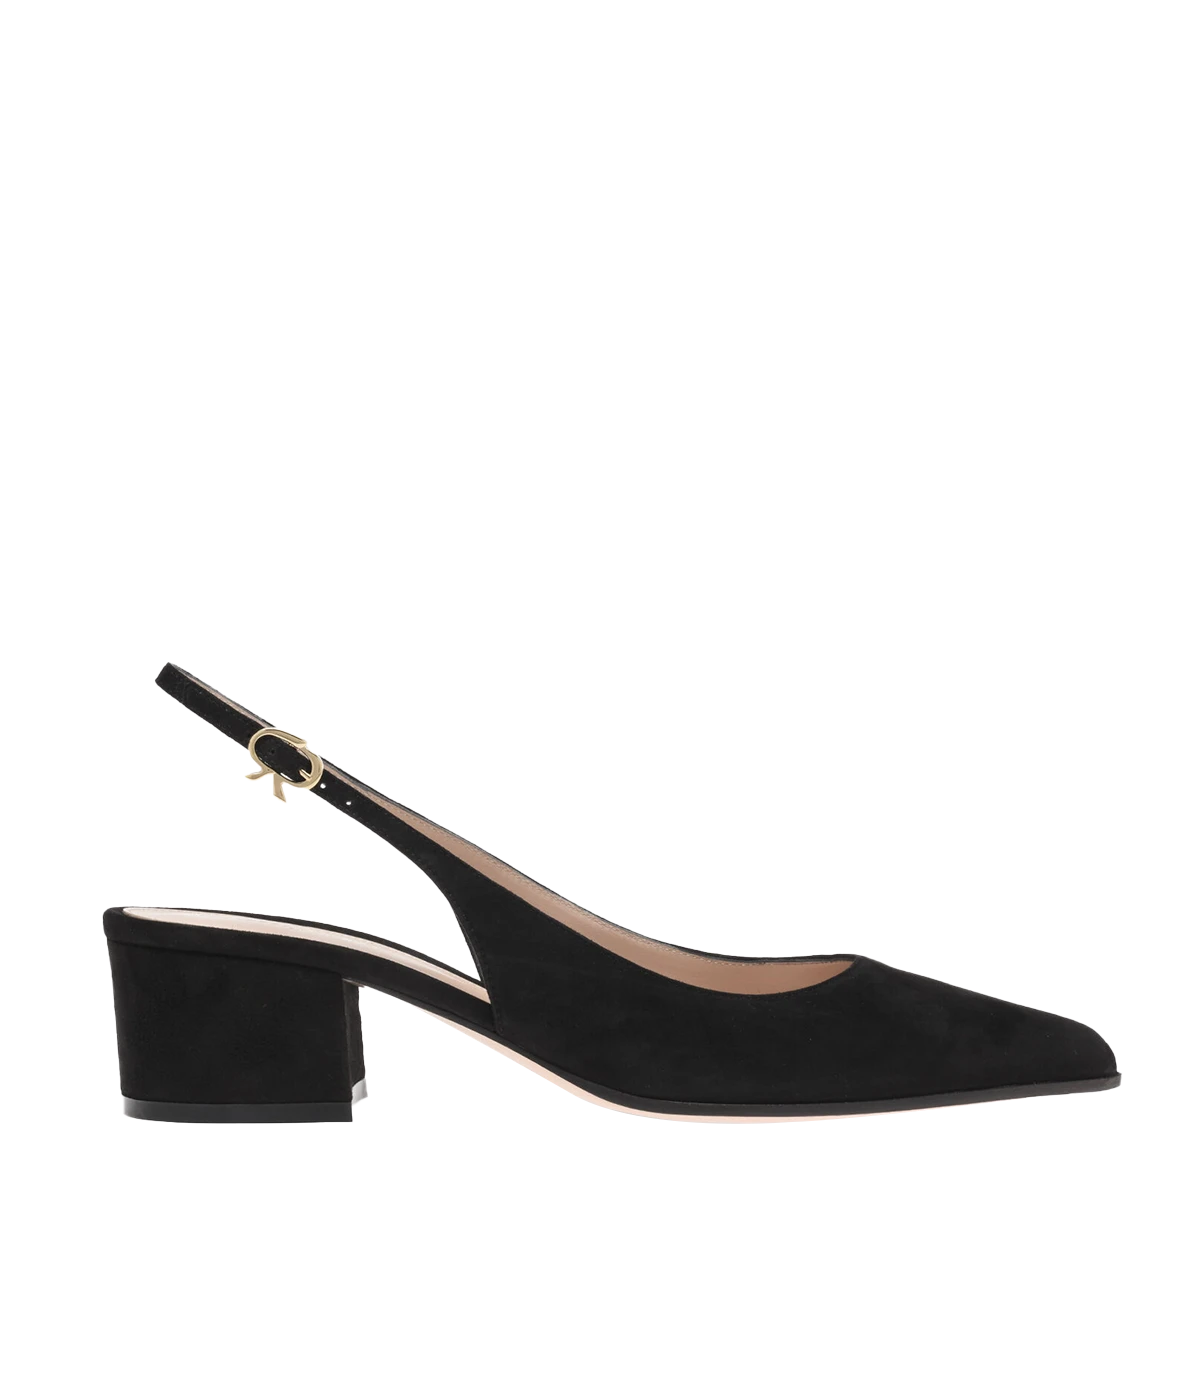 A block heel sling back, with a pointed toe for an elegant look. Crafted from supple suede leather, elevate any outfit, corporate or casual. 45mm heel height for all day comfort. 